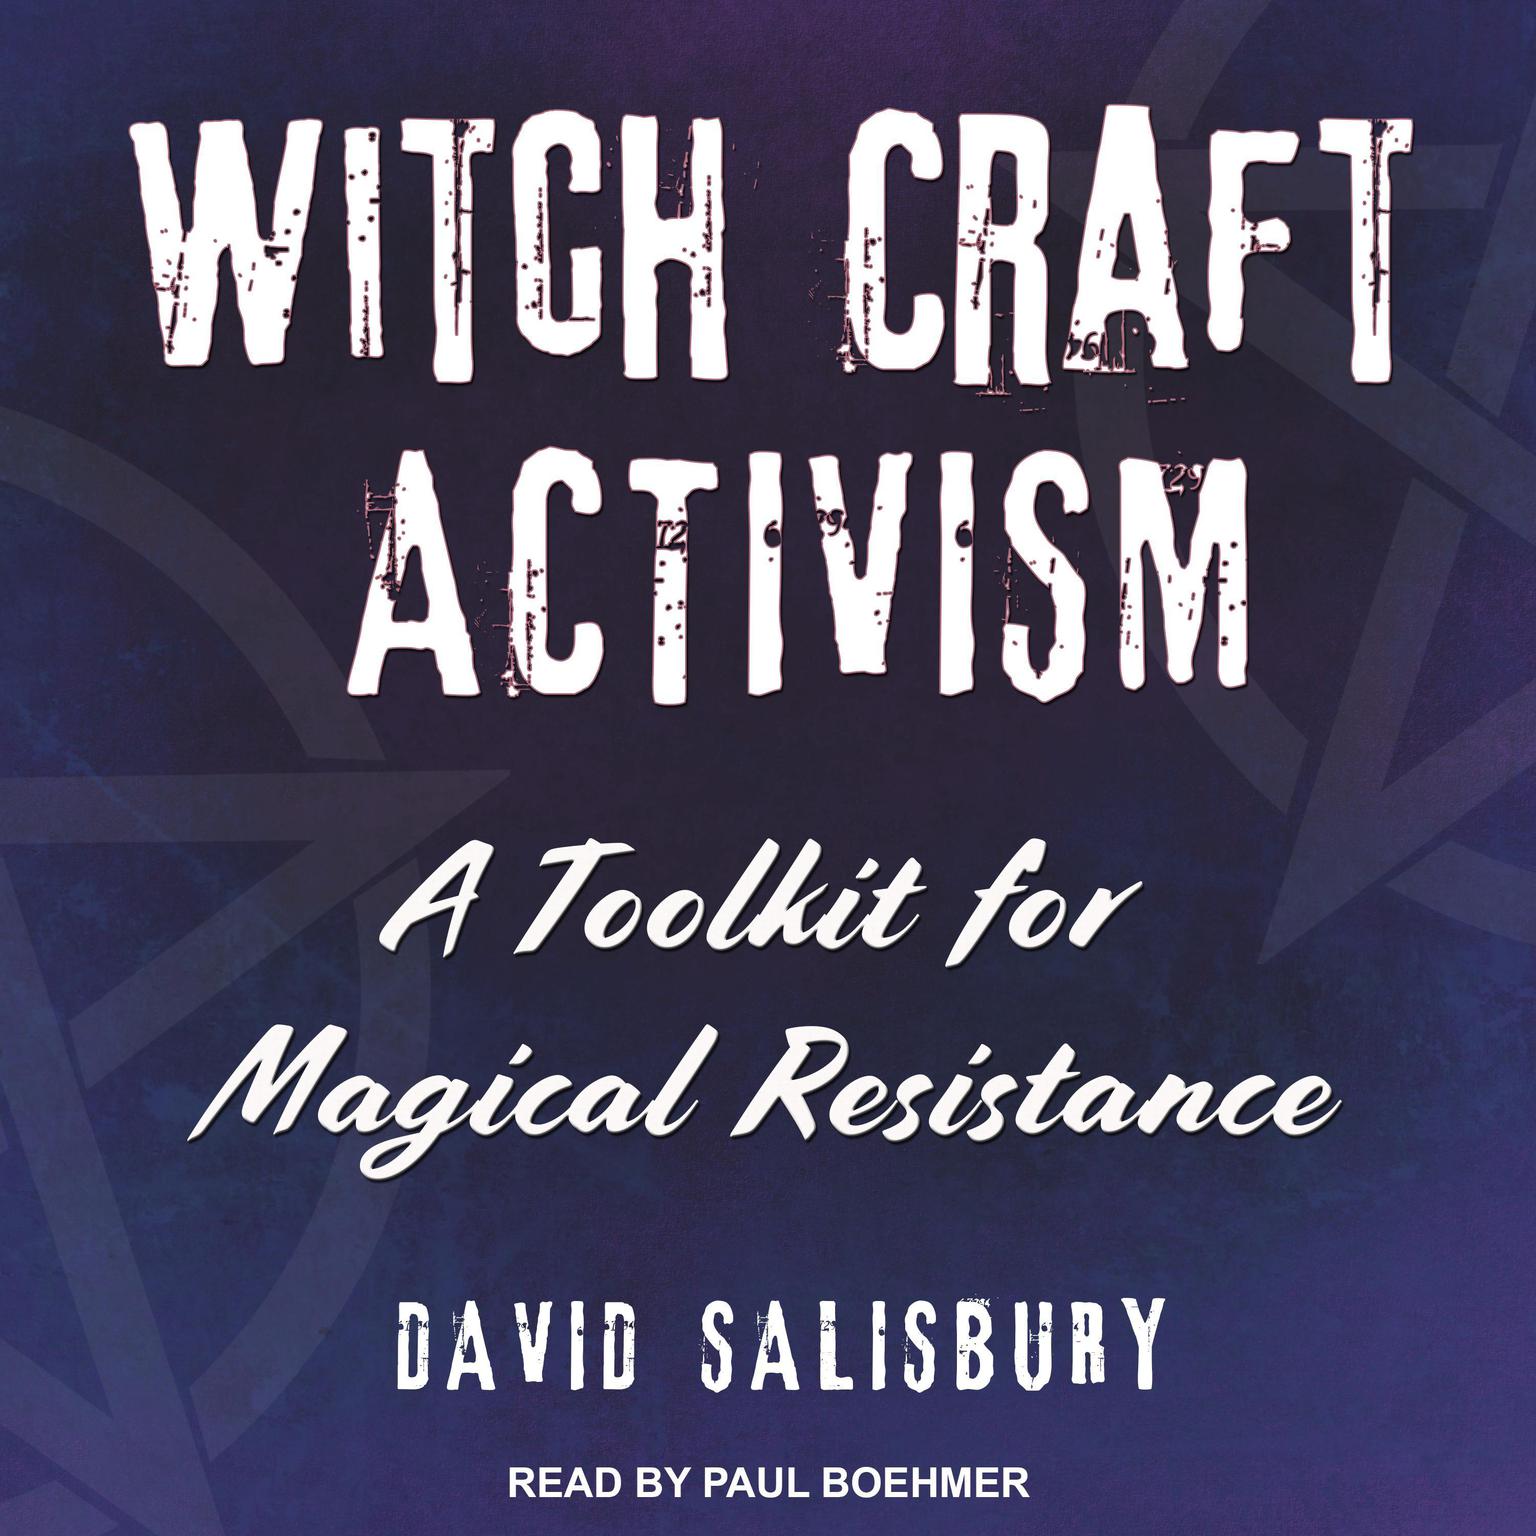 Witchcraft Activism: A Toolkit for Magical Resistance Audiobook, by David Salisbury